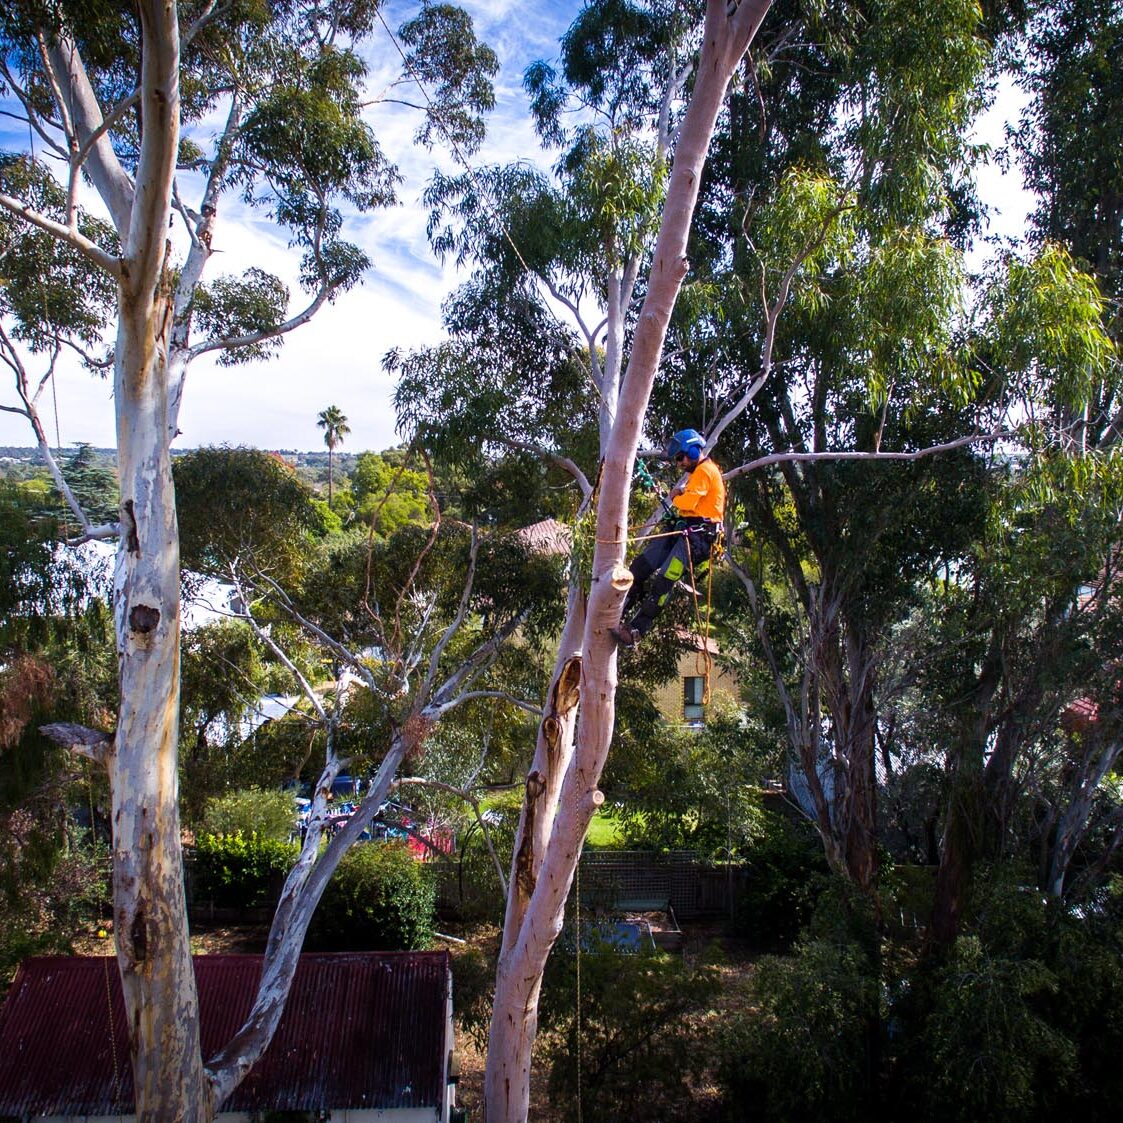 Arbortec, a team of experienced arborists and tree service experts, offers top-notch eucalyptus tree pruning services in Sydney.